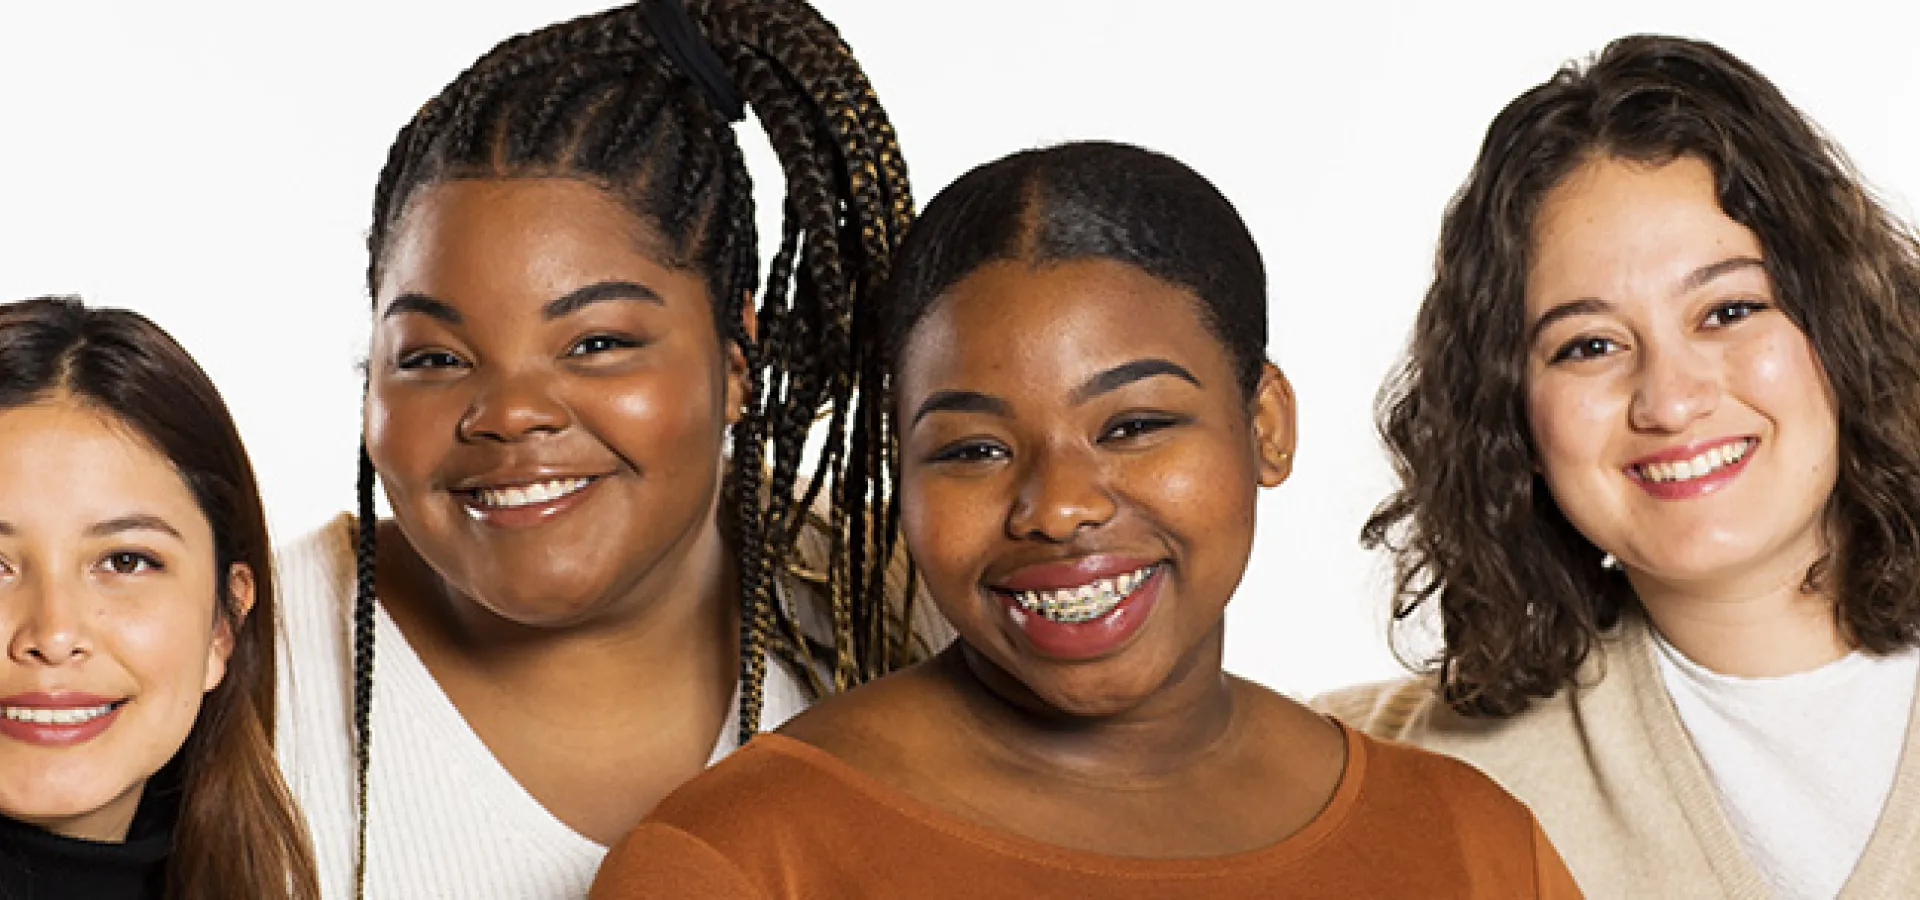 Portrait of four students on a white background